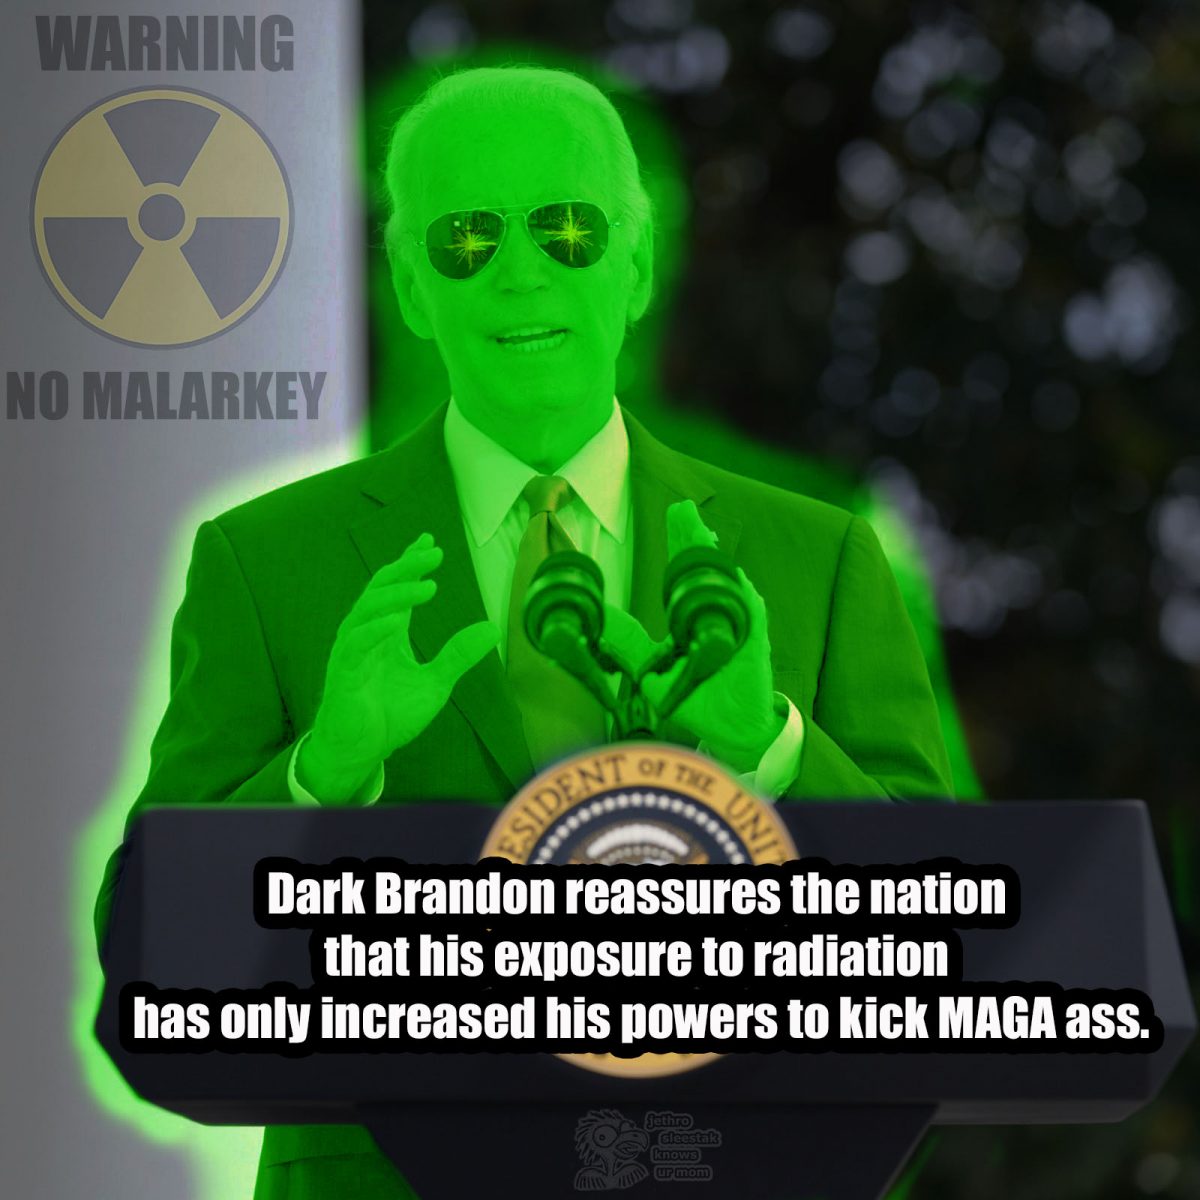 Dark Brandon reassures the nation that his exposure to radiation has only increased his powers to kick MAGA ass.